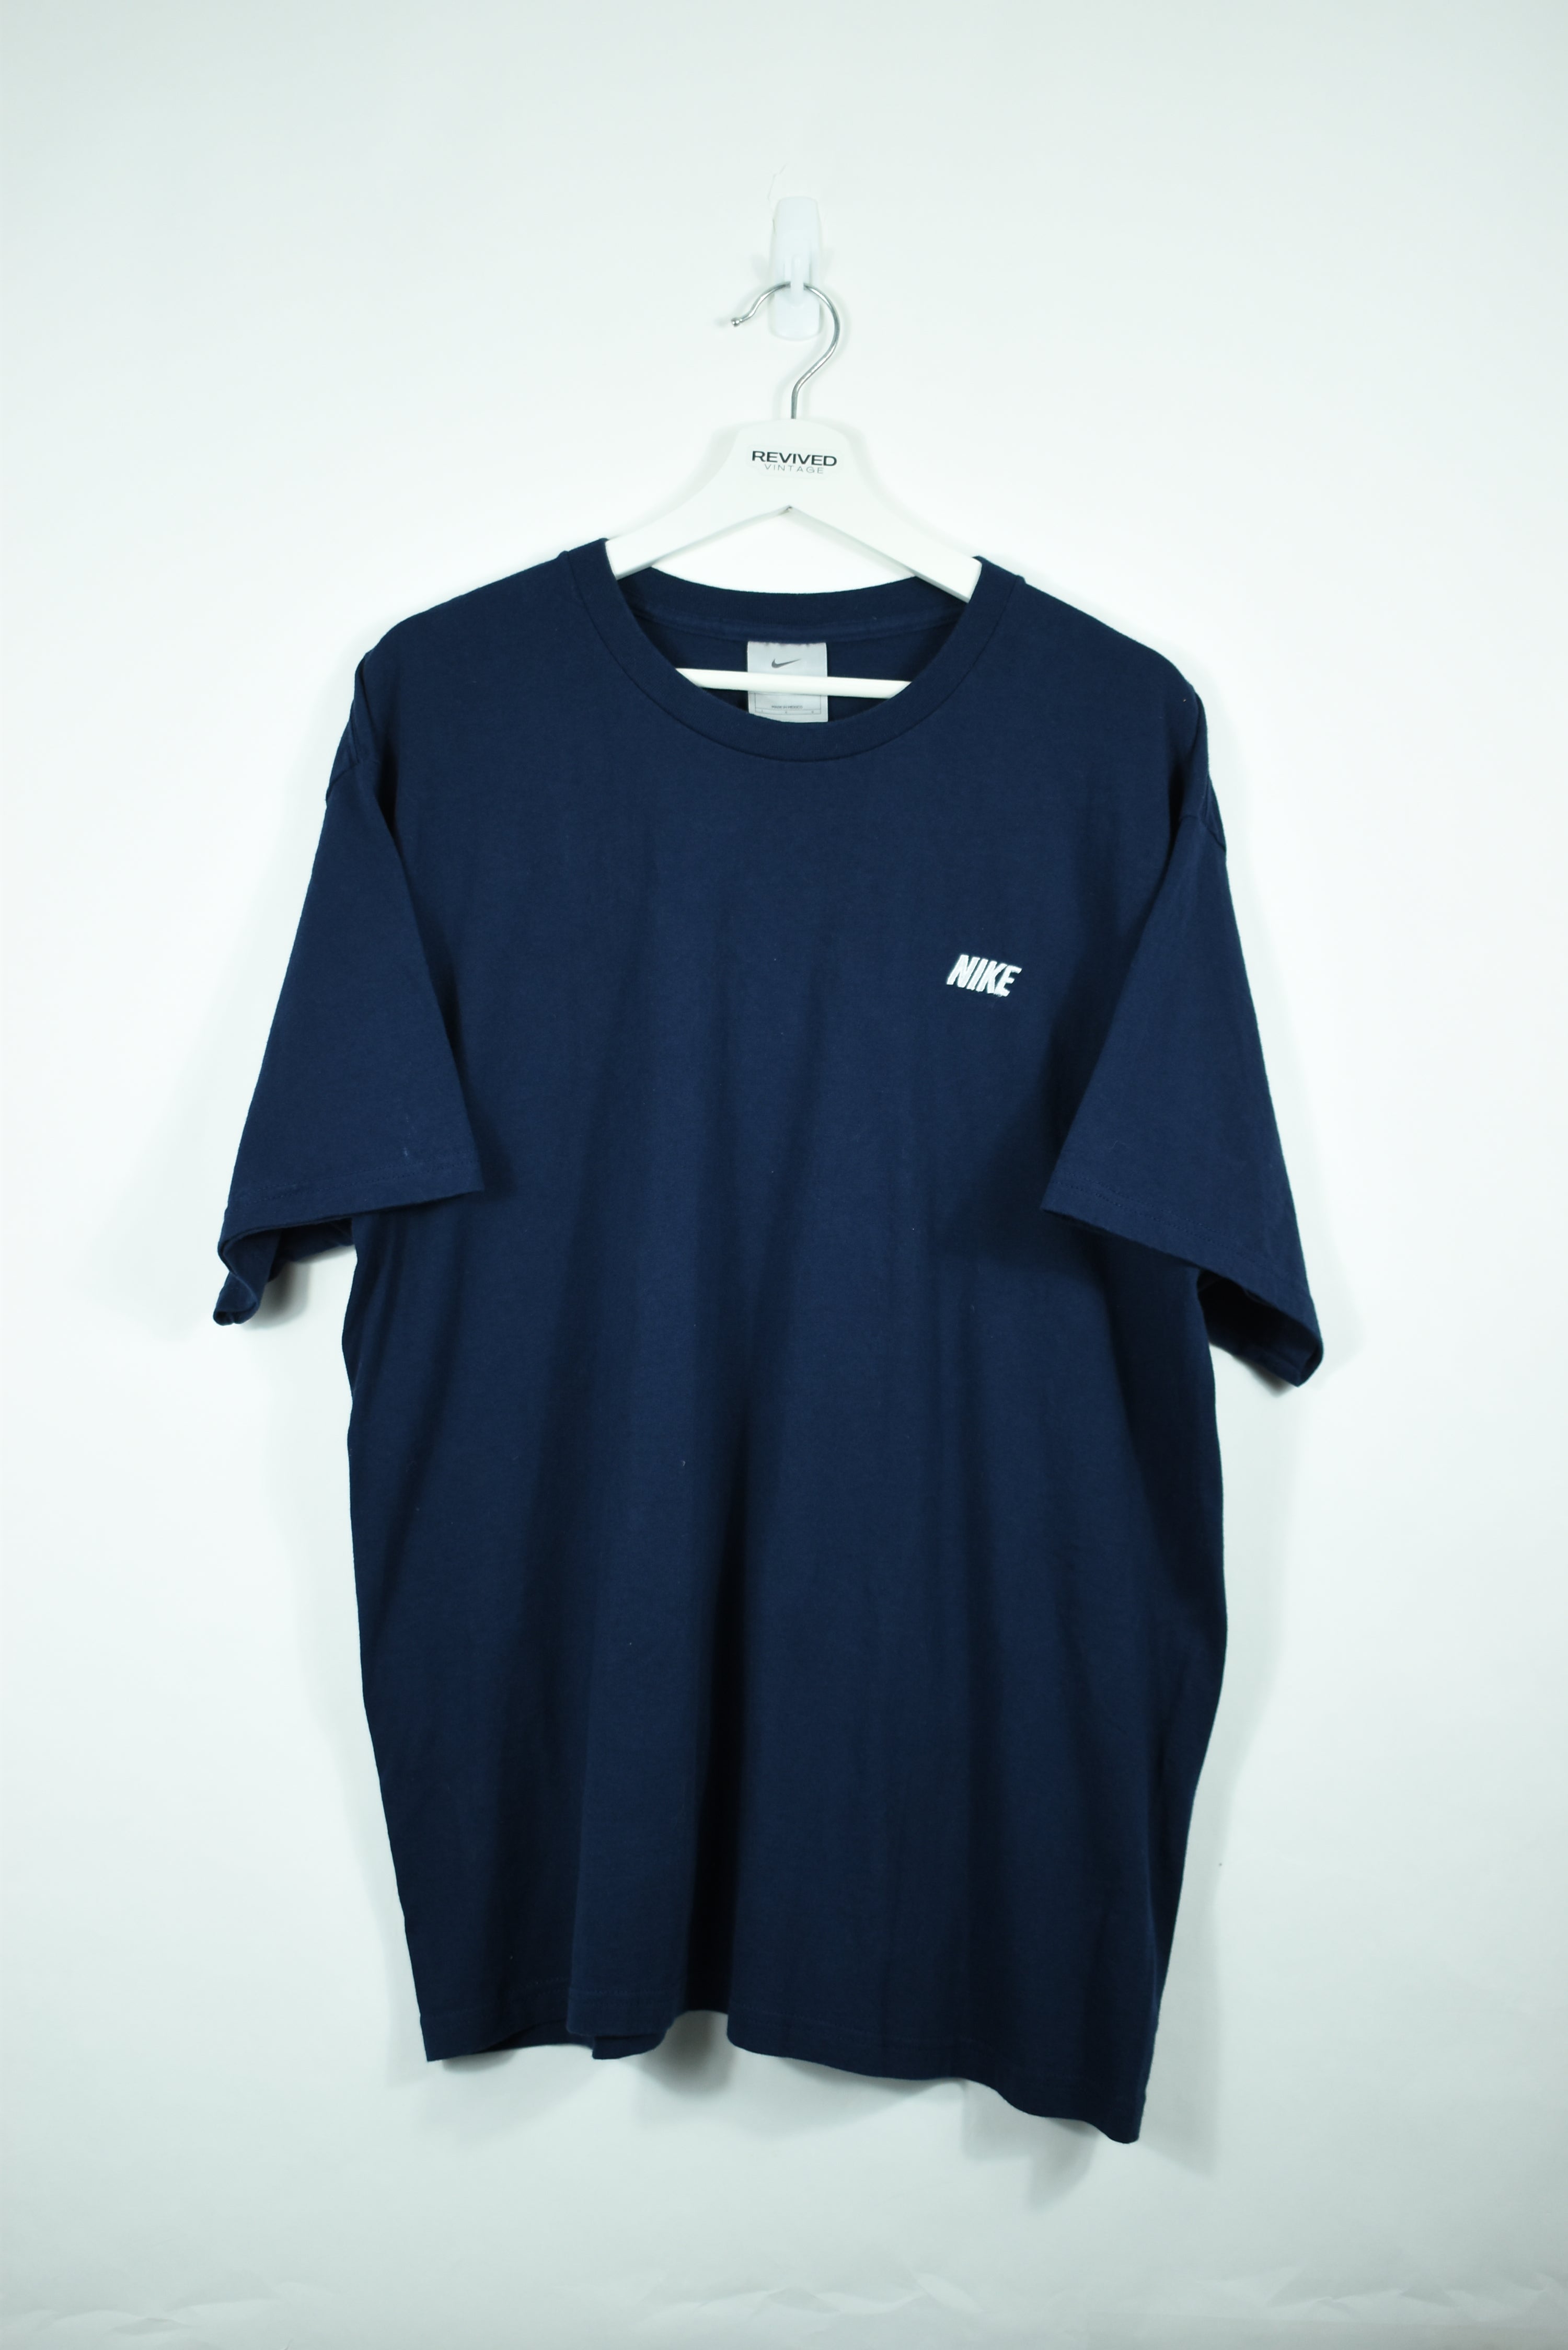 VINTAGE NIKE EMBROIDERY SPELLOUT T SHIRT NAVY XLARGE